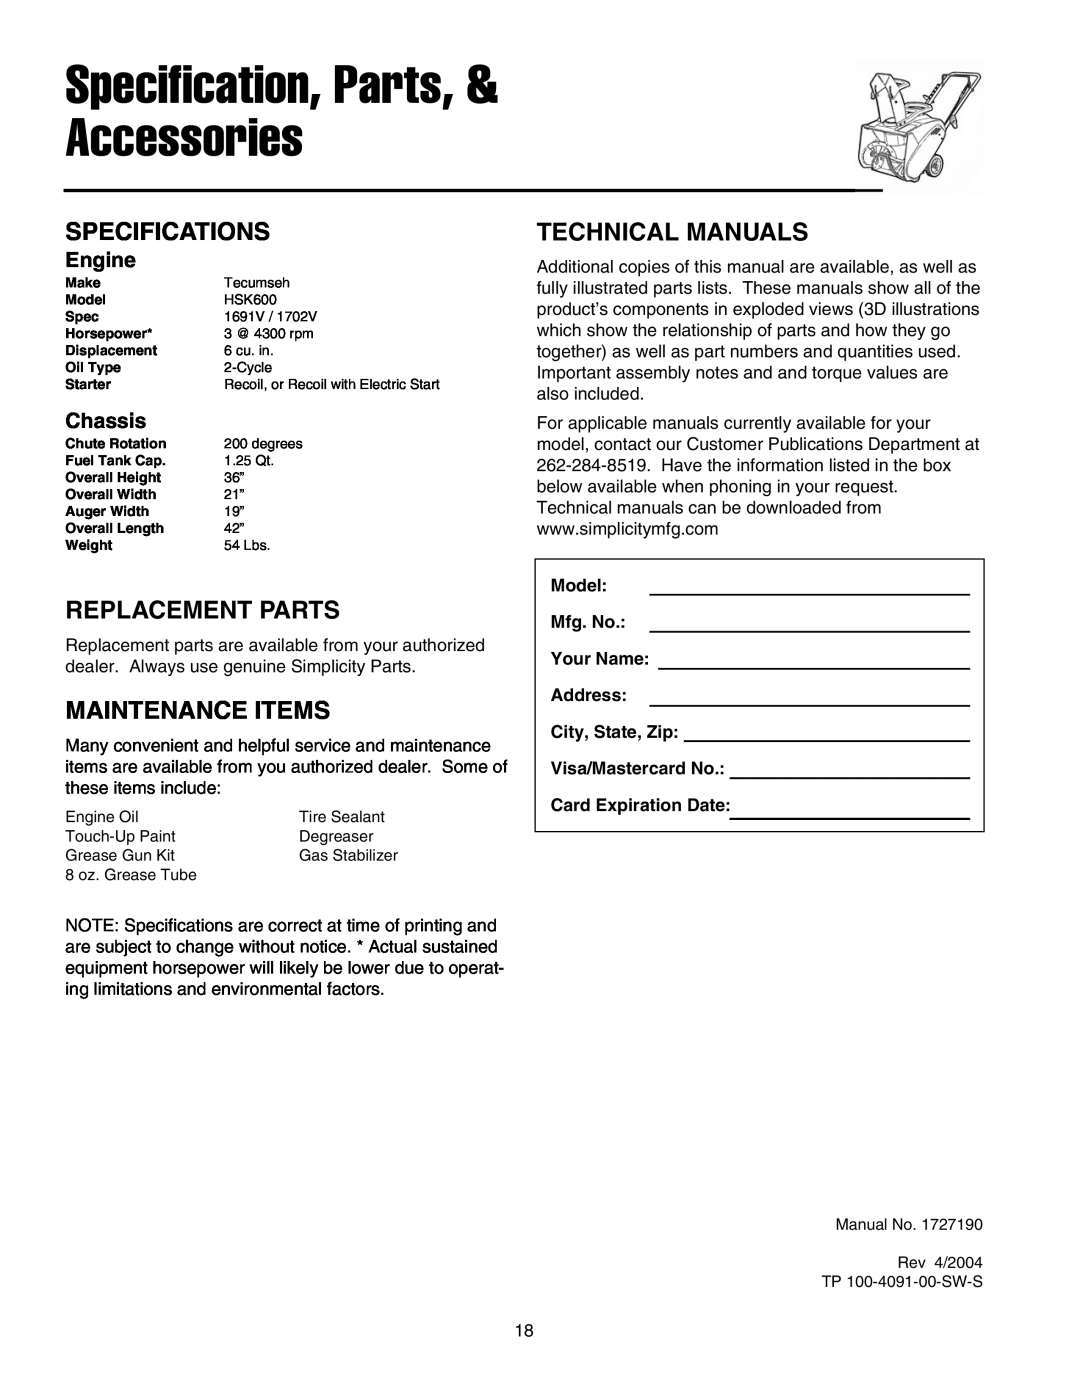 Simplicity 1694584 319E Specifications, Replacement Parts, Maintenance Items, Technical Manuals, Engine, Chassis 